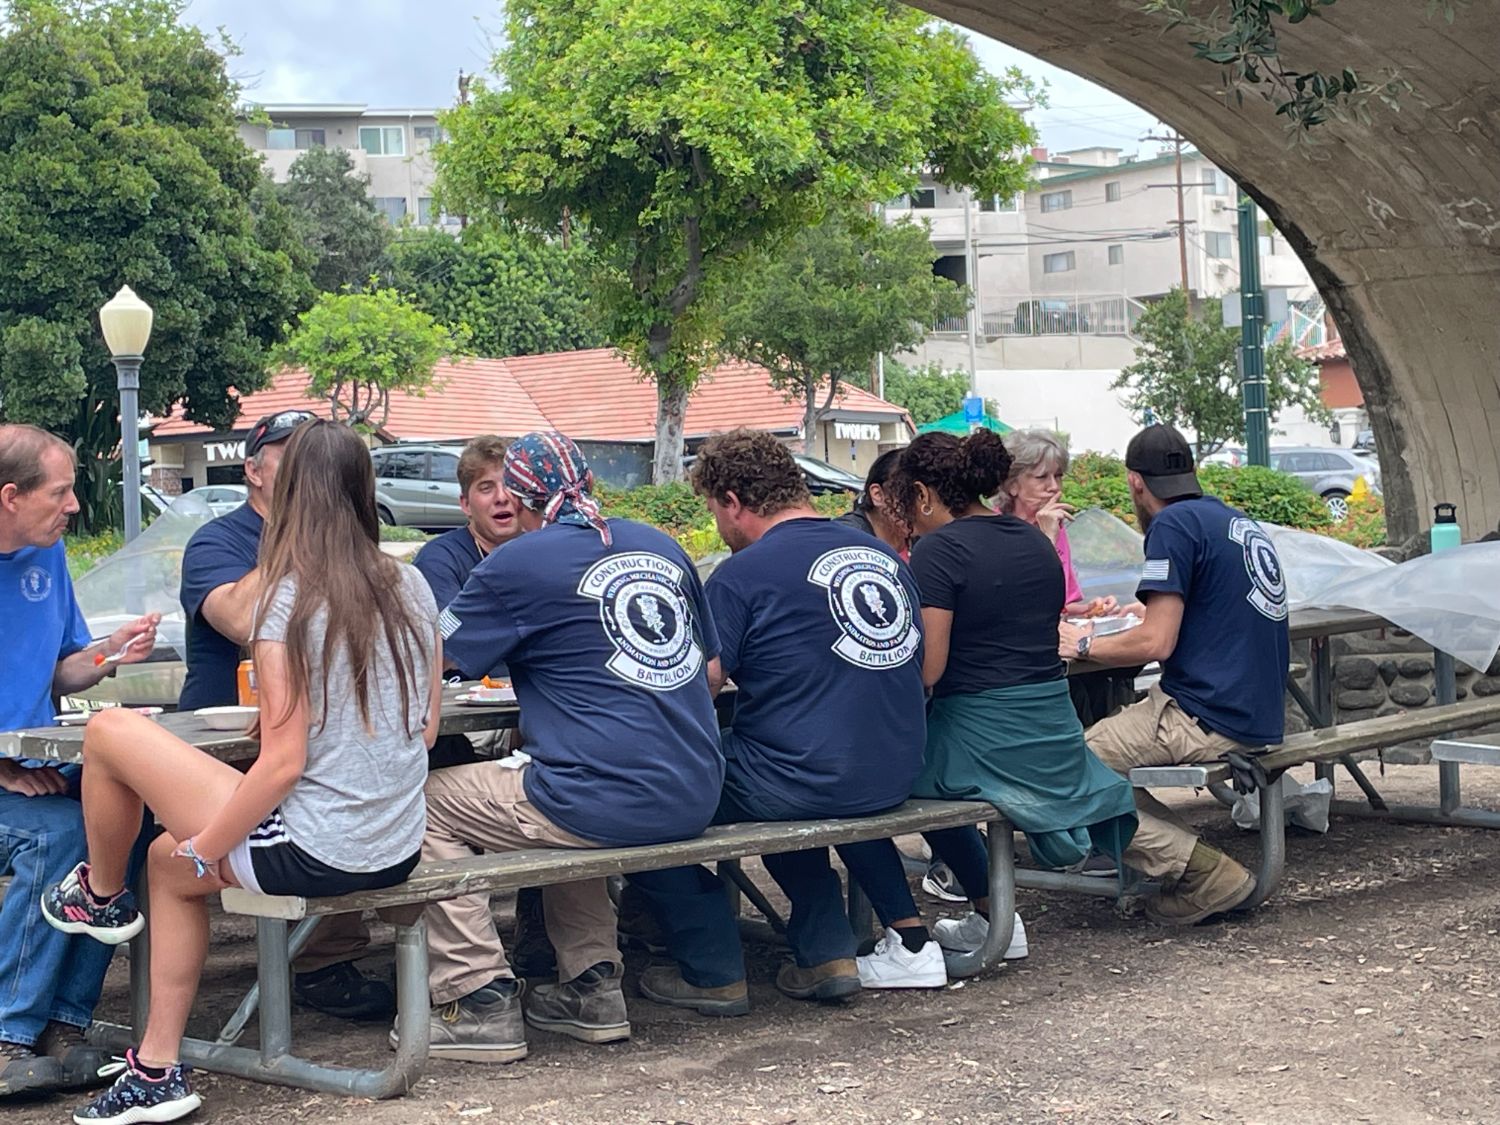 PHOTO: provided by SPTOR | The South Pasadenan | Work crew at lunch under the Oaklawn Bridge at the War Memorial Building tent site. 